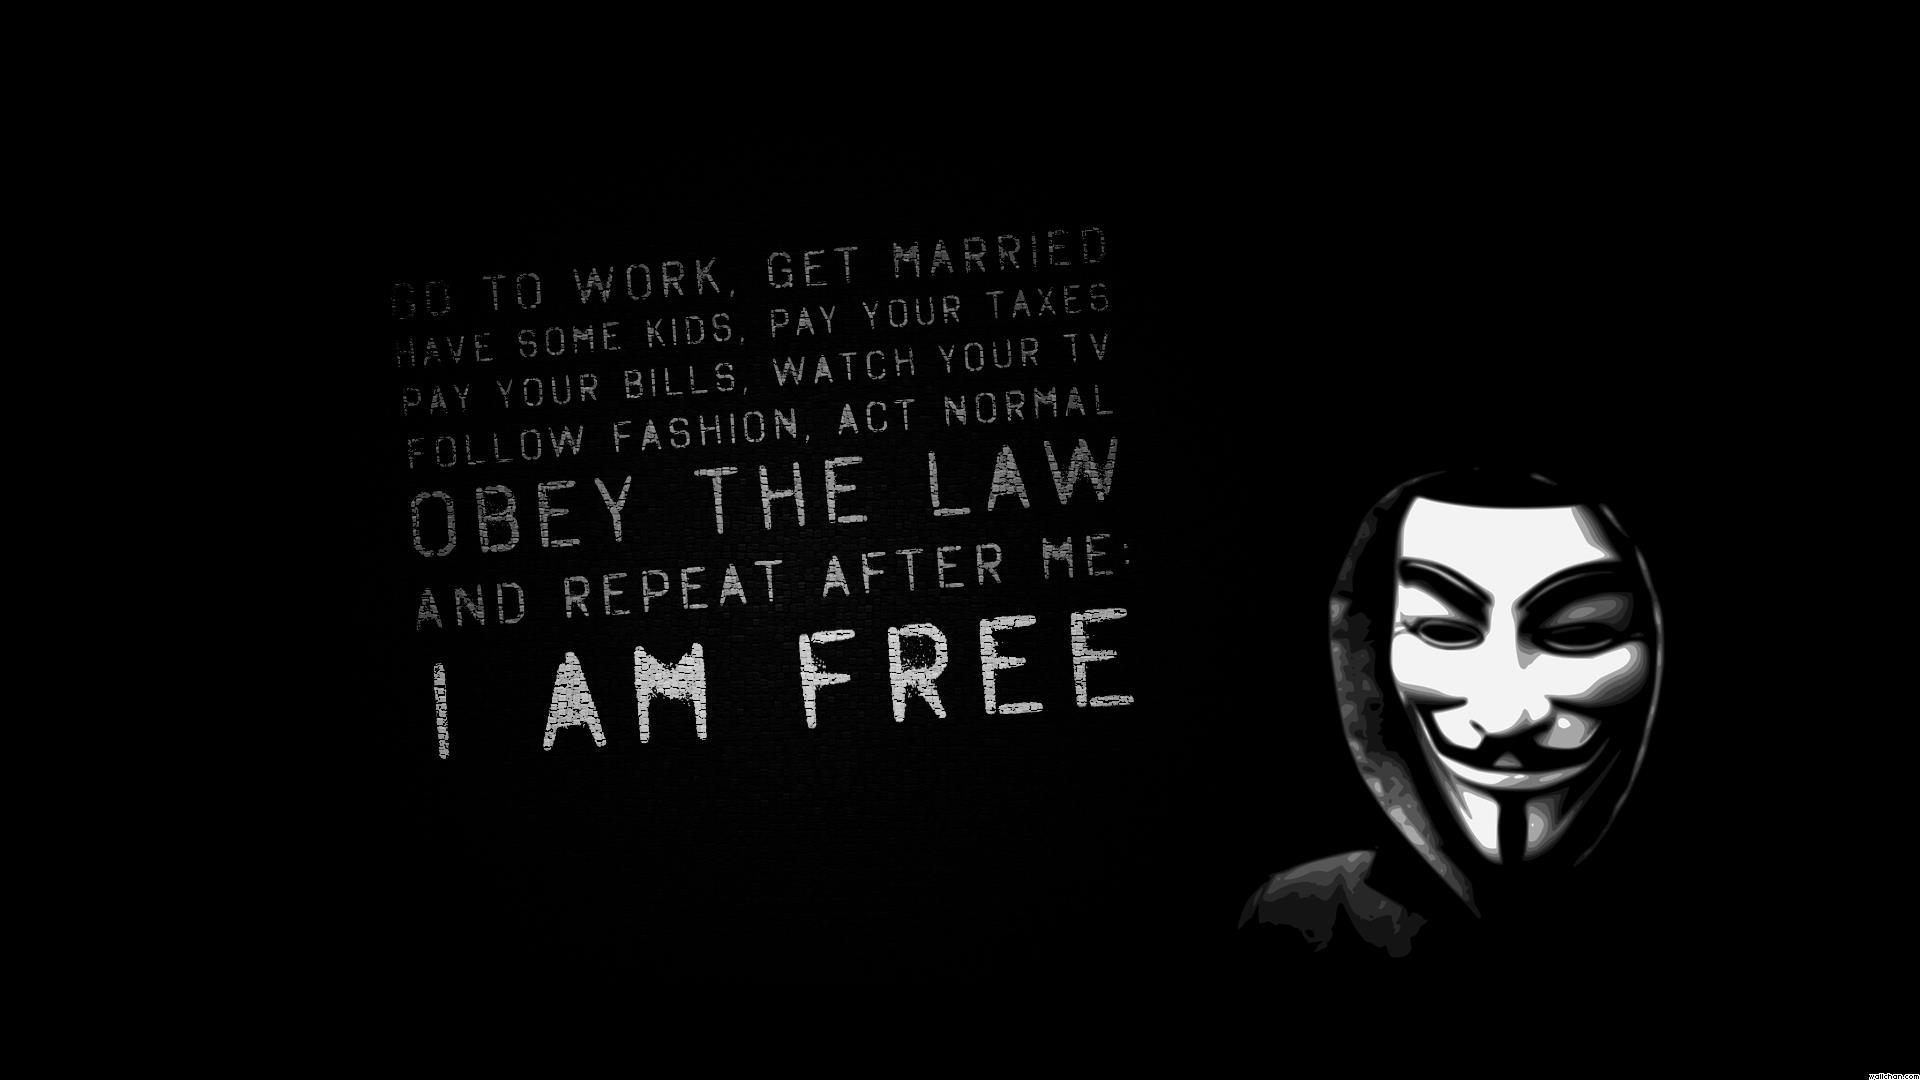 Quote from movie V for Vendetta